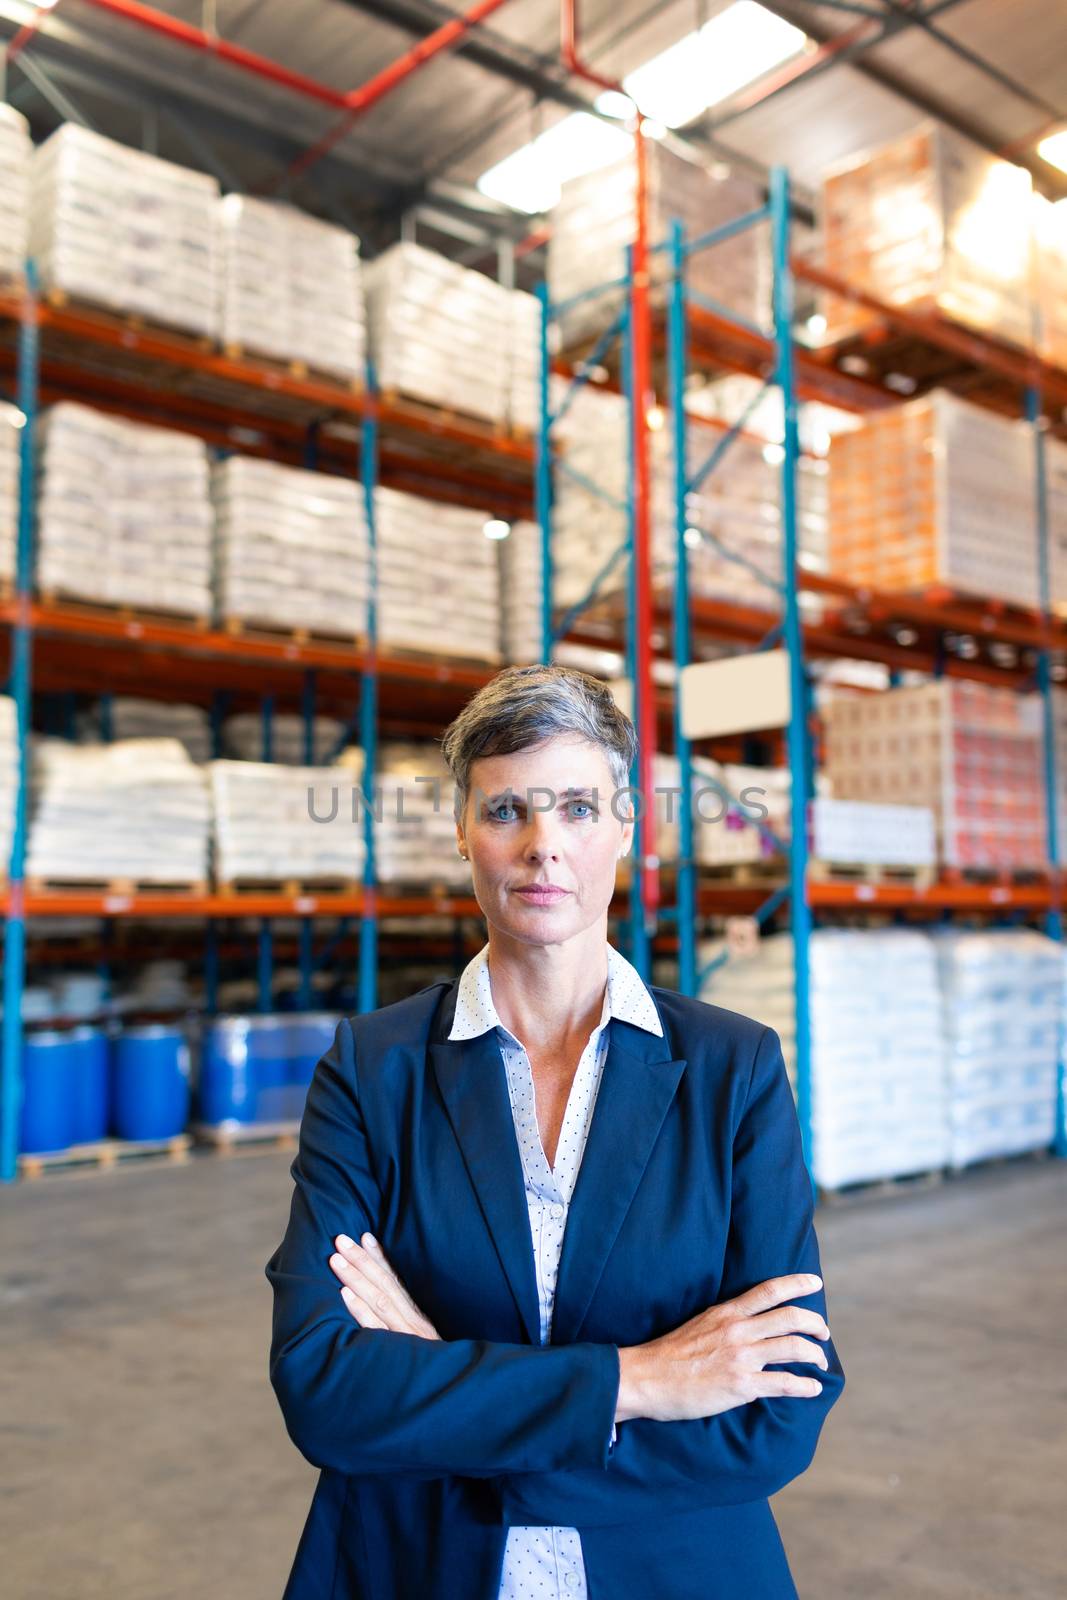 Female manager standing with arm crossed and looking at camera in warehouse by Wavebreakmedia